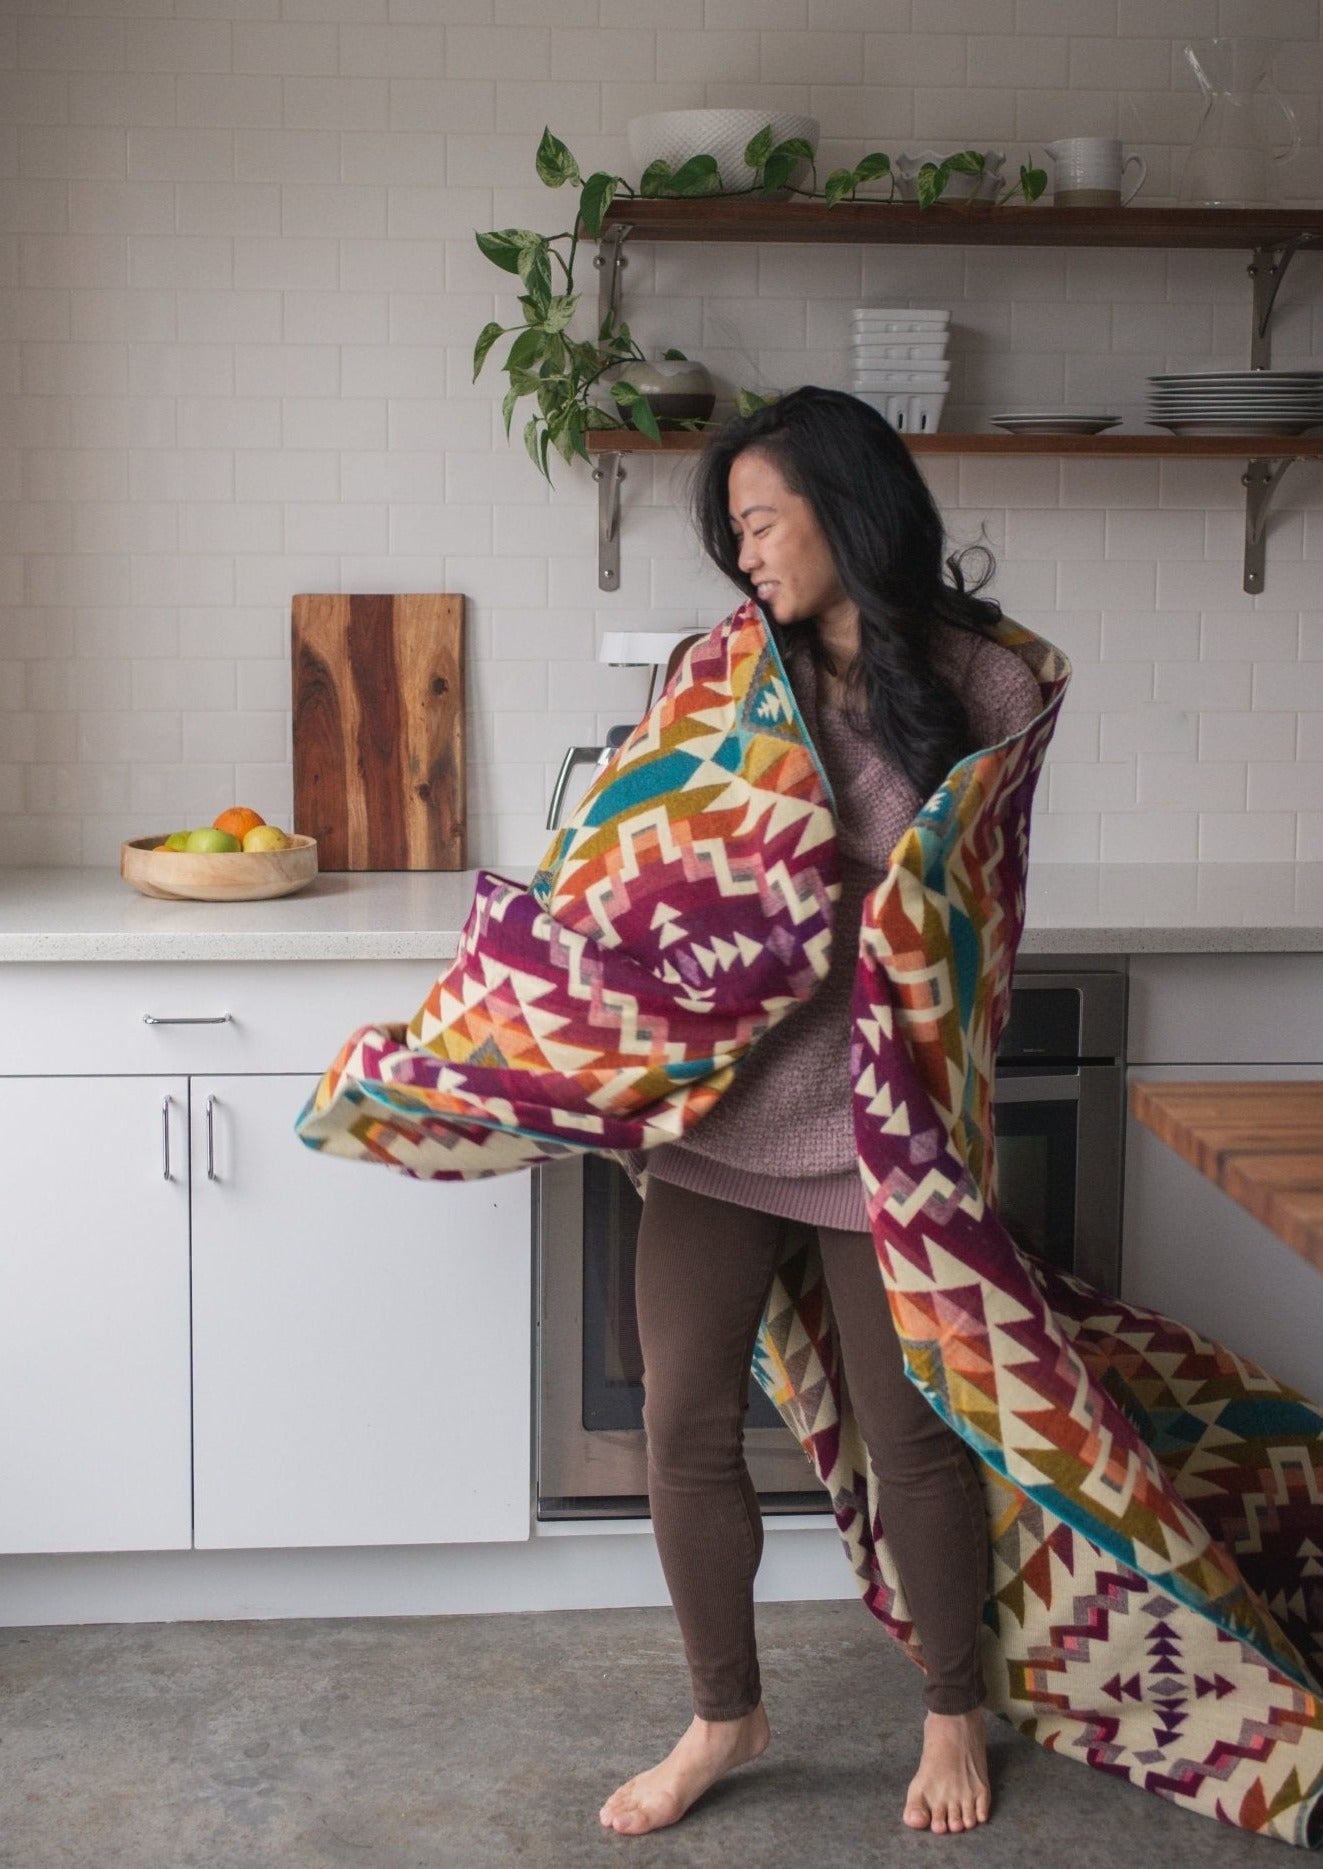 Asian girl dances in her modern kitchen with pure happiness with her cozy alpaca blanket woven in pinks. 